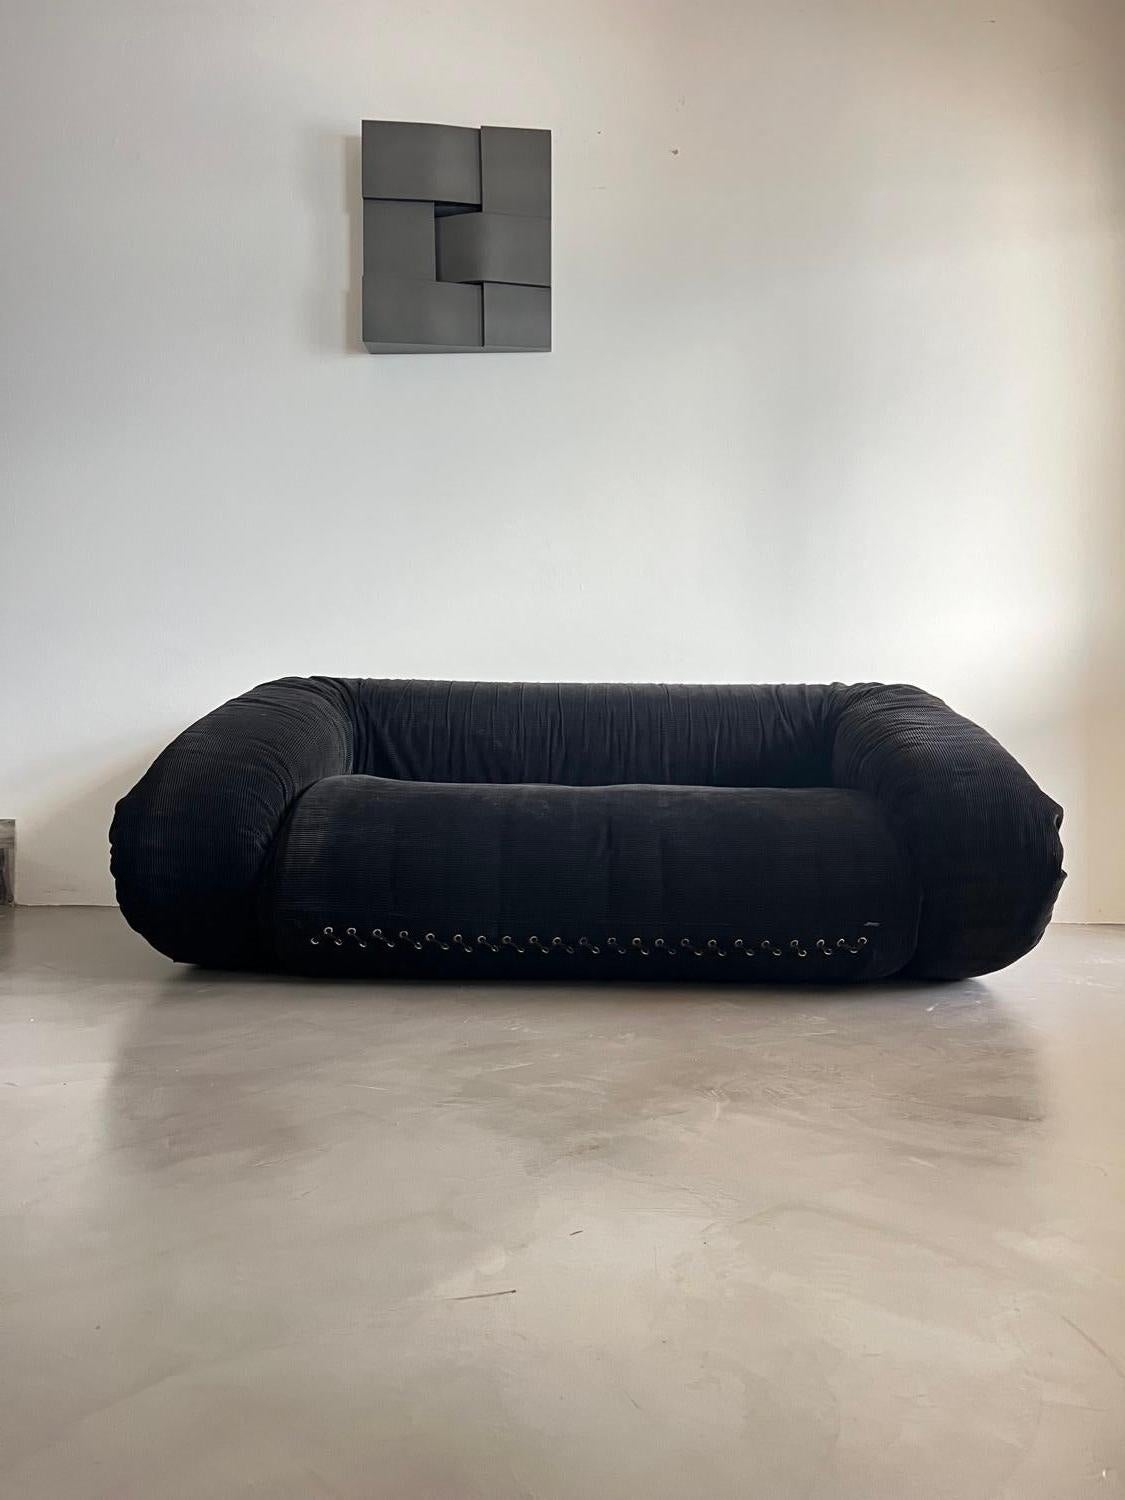 Convertible Sofa - Sofa Bed - Iconic Two Seater Sofa - Timeless Design - 

Designed in 1965, the Anfibio Sofa by Alessandro Becchi is one of the most iconic convertible sofa beds ever- Its identifying shape, with soft, thick armrests running all